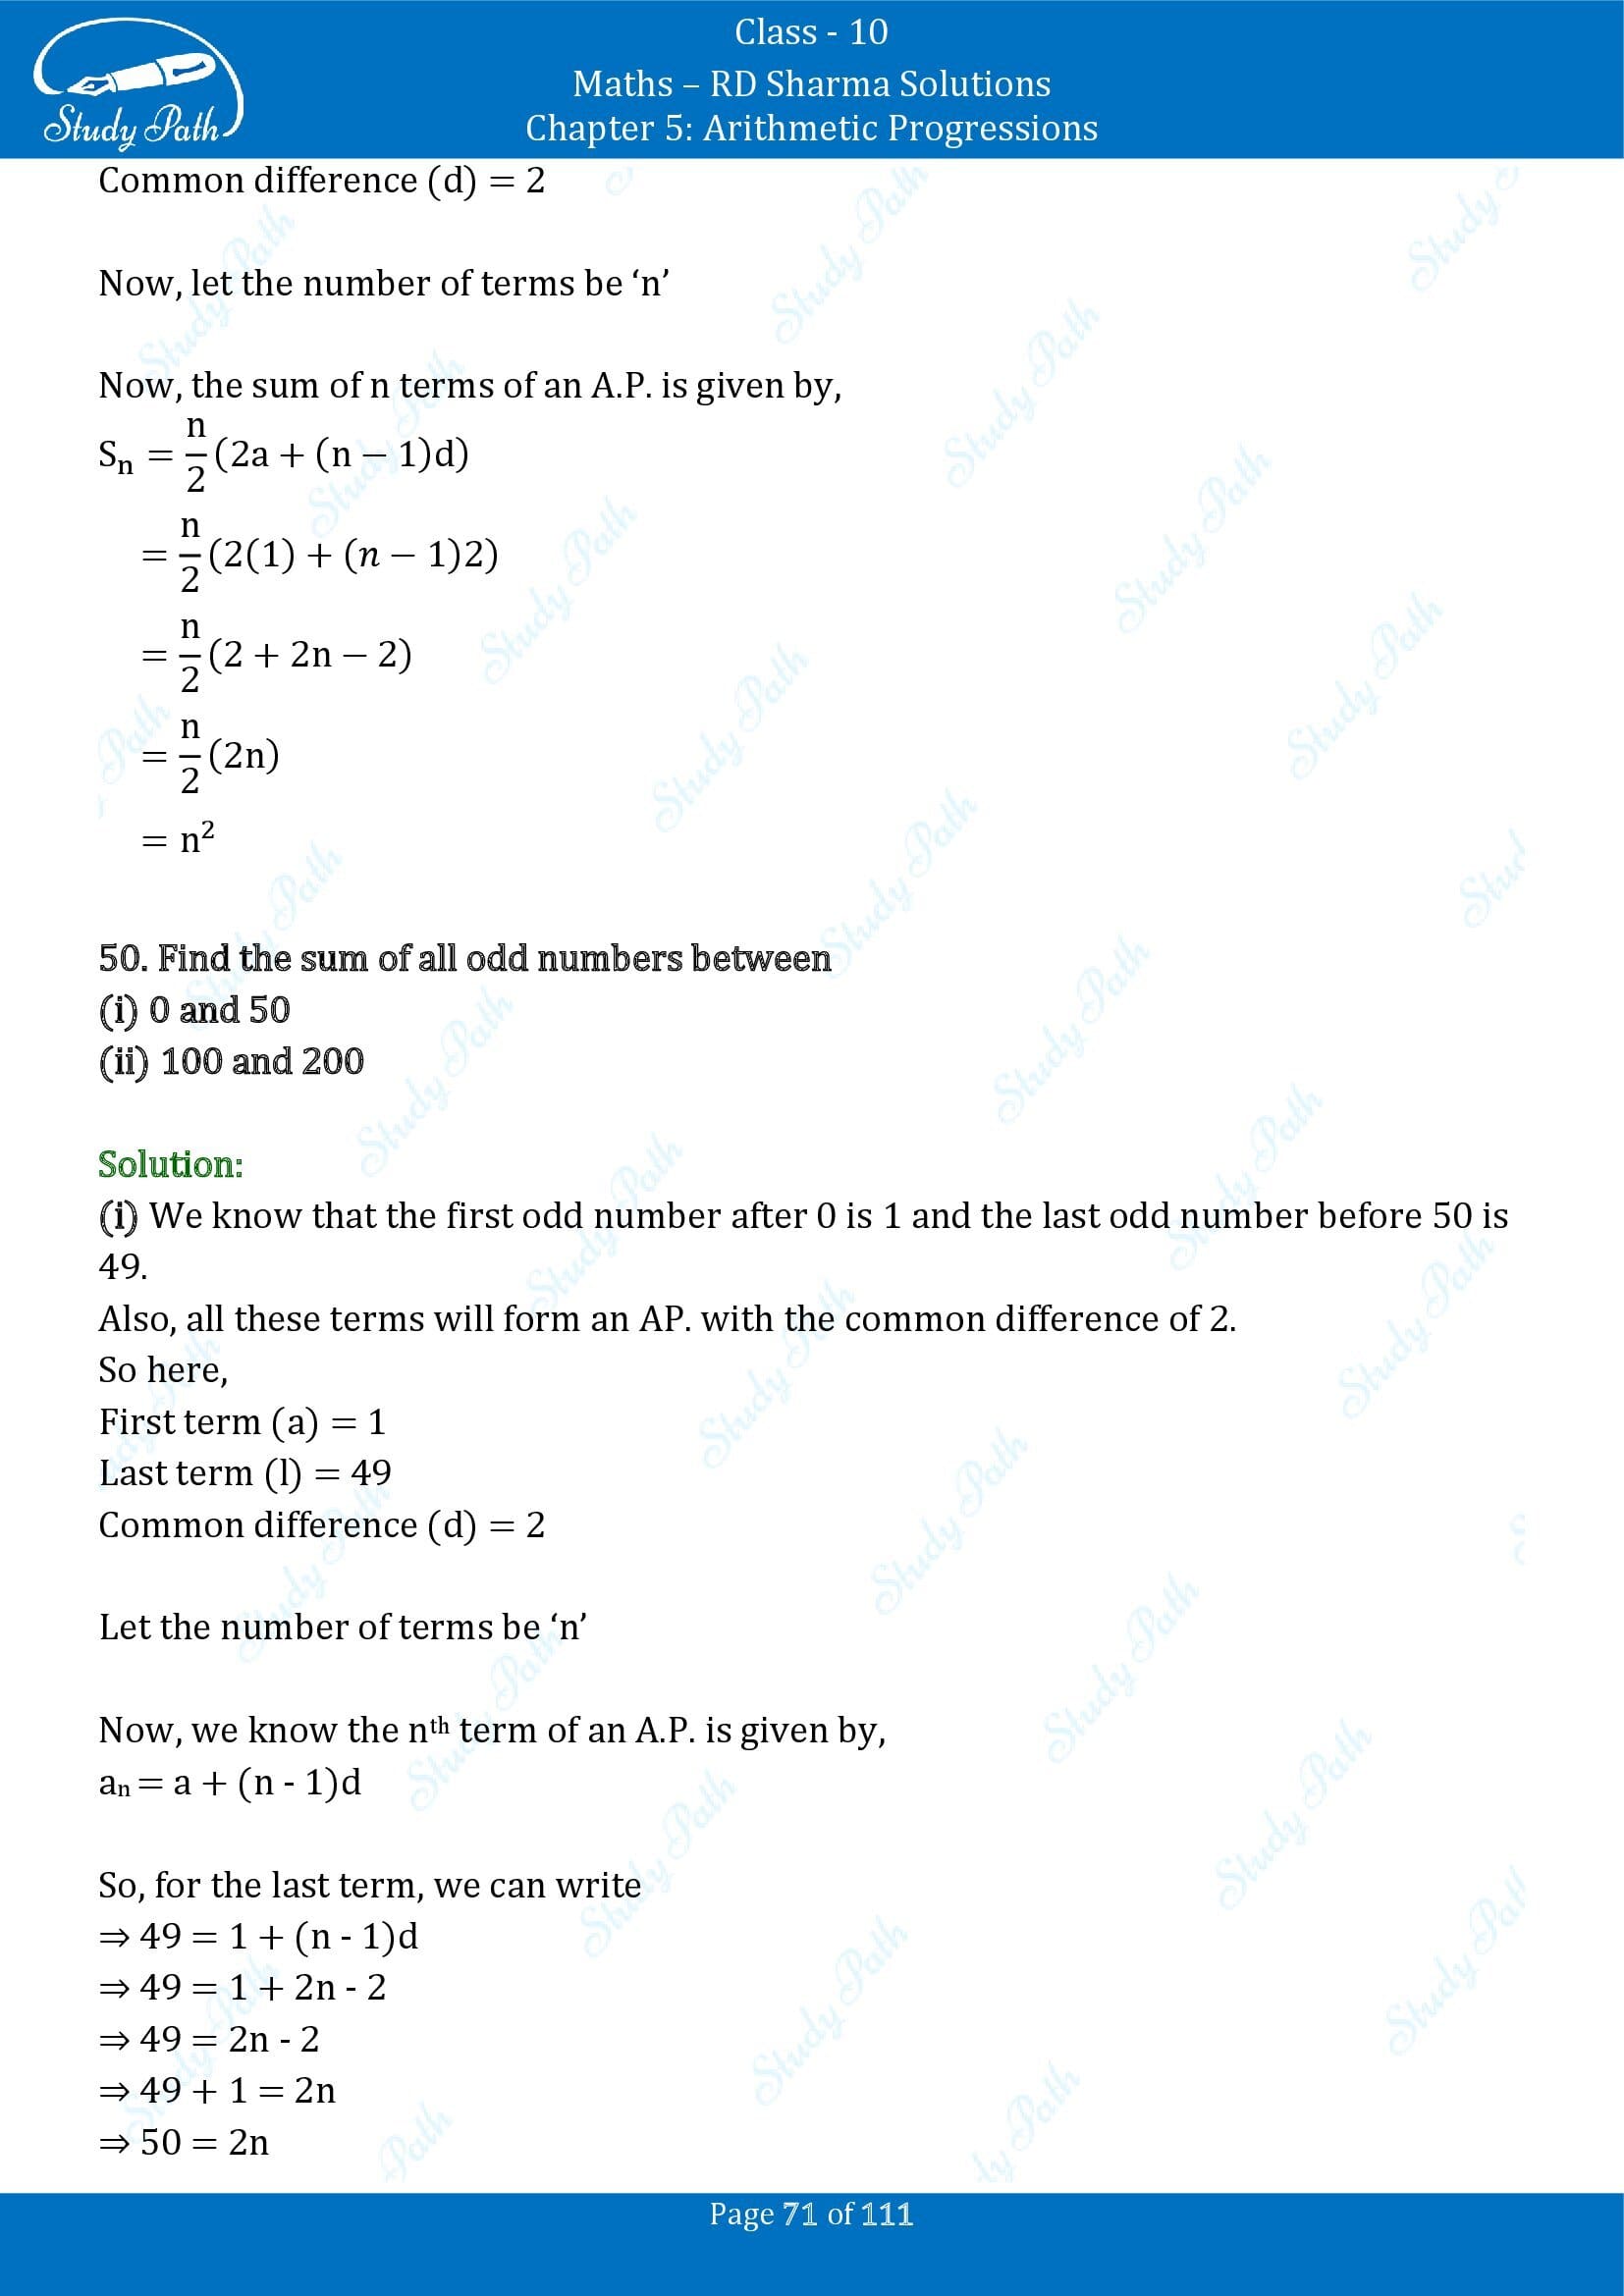 RD Sharma Solutions Class 10 Chapter 5 Arithmetic Progressions Exercise 5.6 00071